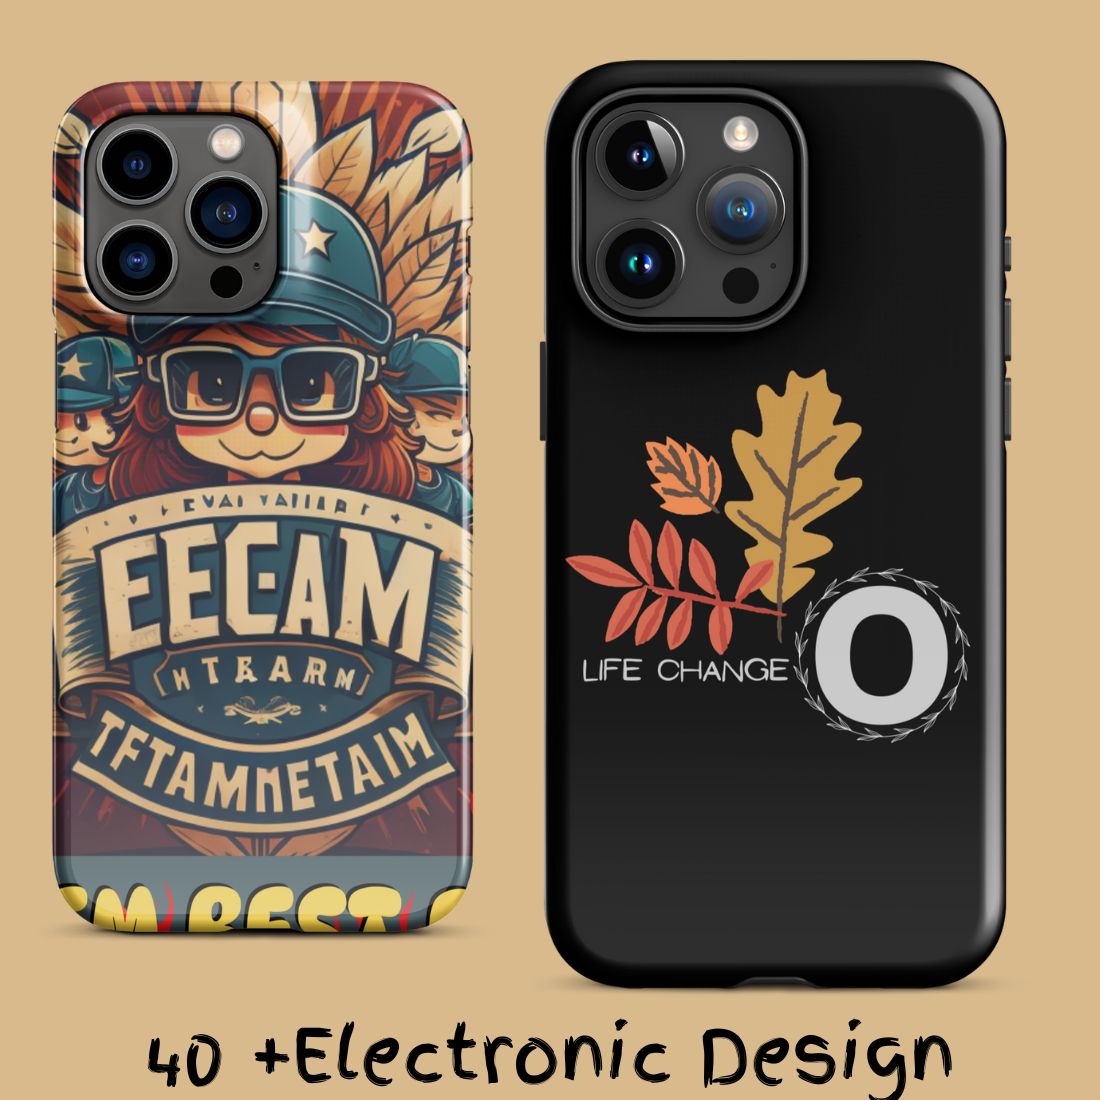 Electronic item design like Airpod , Mobile cover, iphone, android cover 40 plus design preview image.